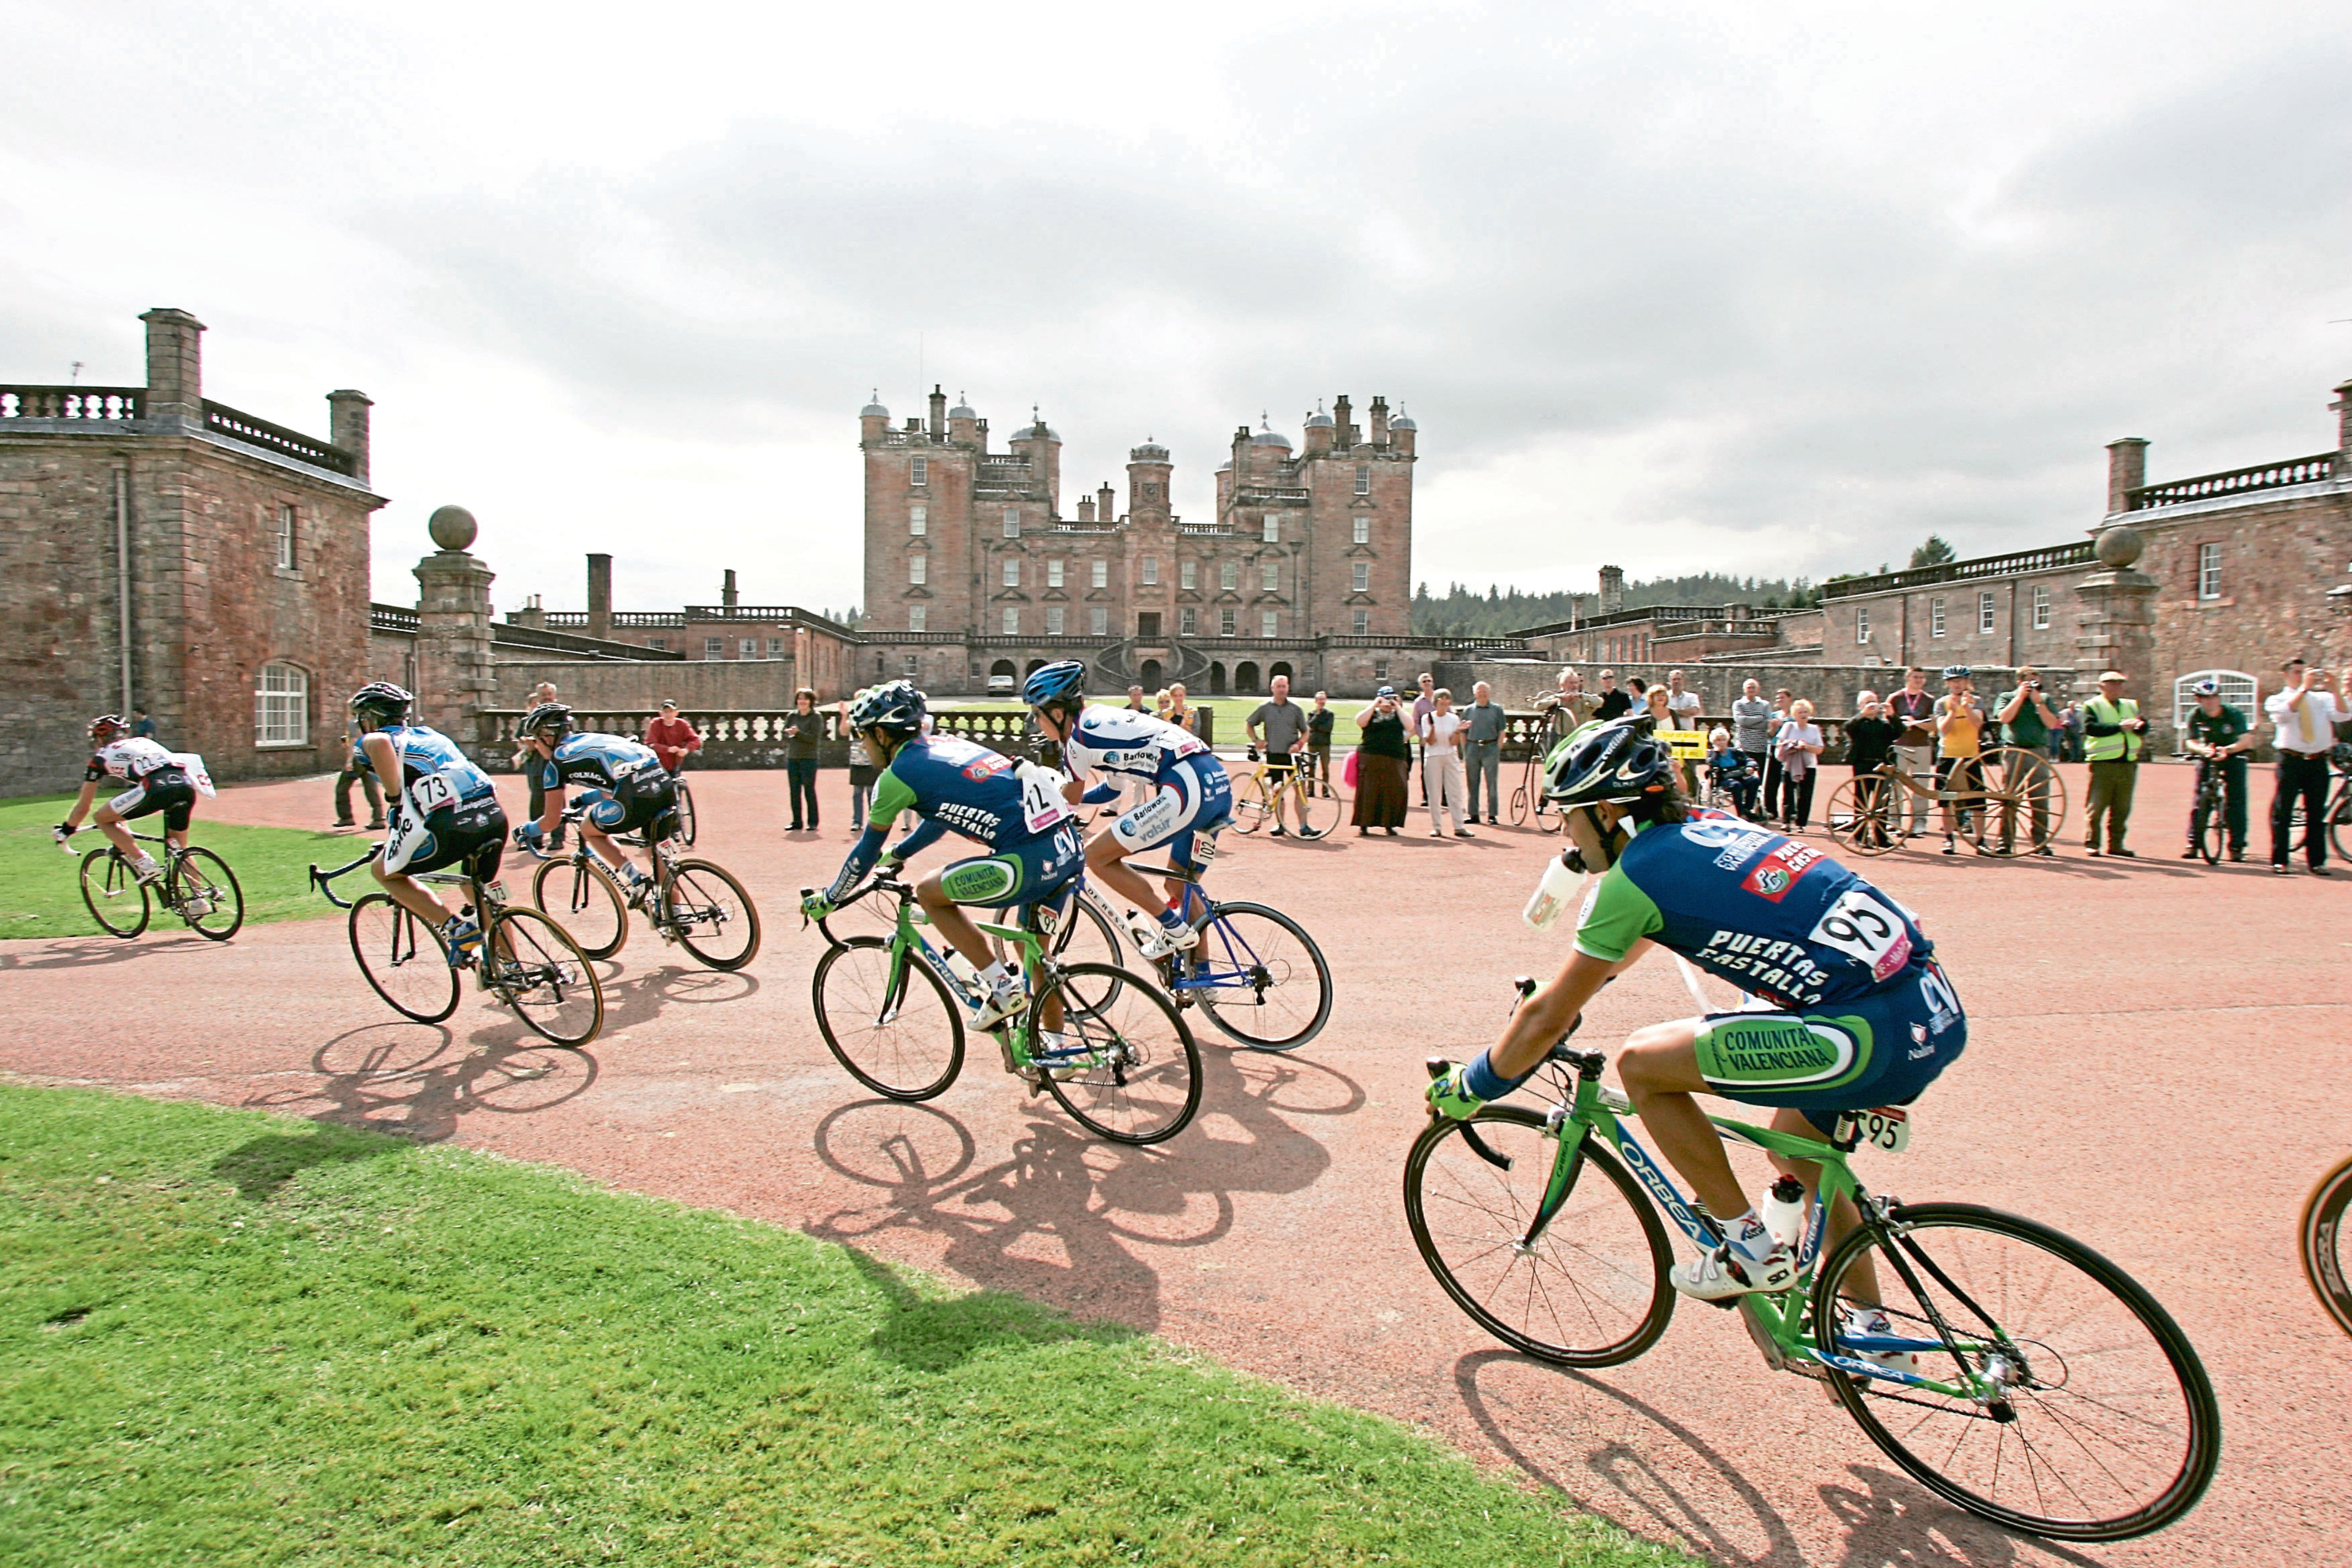 The 2005 Tour of Britain. Stage 1: Glasgow to Castle Douglas (114.5 miles). The leaders pass Drumlanrig Castle Thornhill.